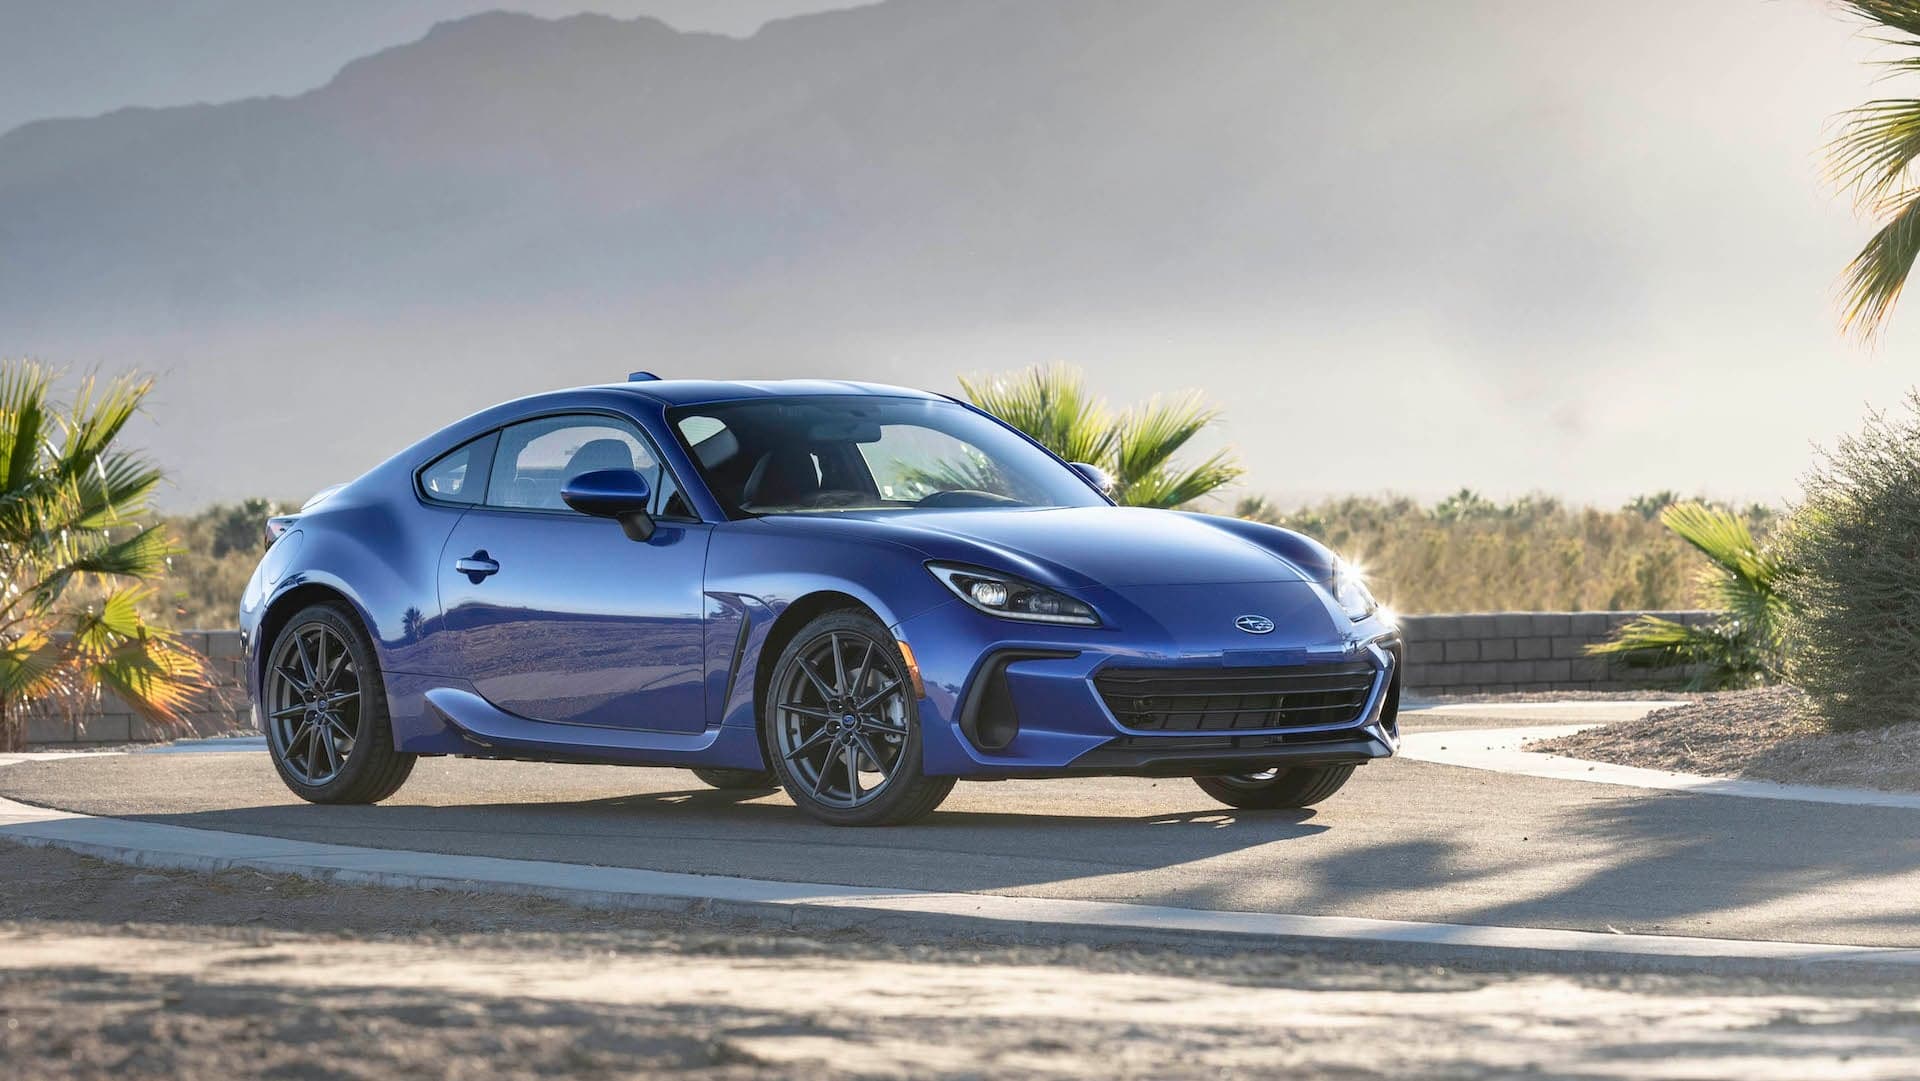 2022 Subaru BRZ: More Pictures From Every Angle